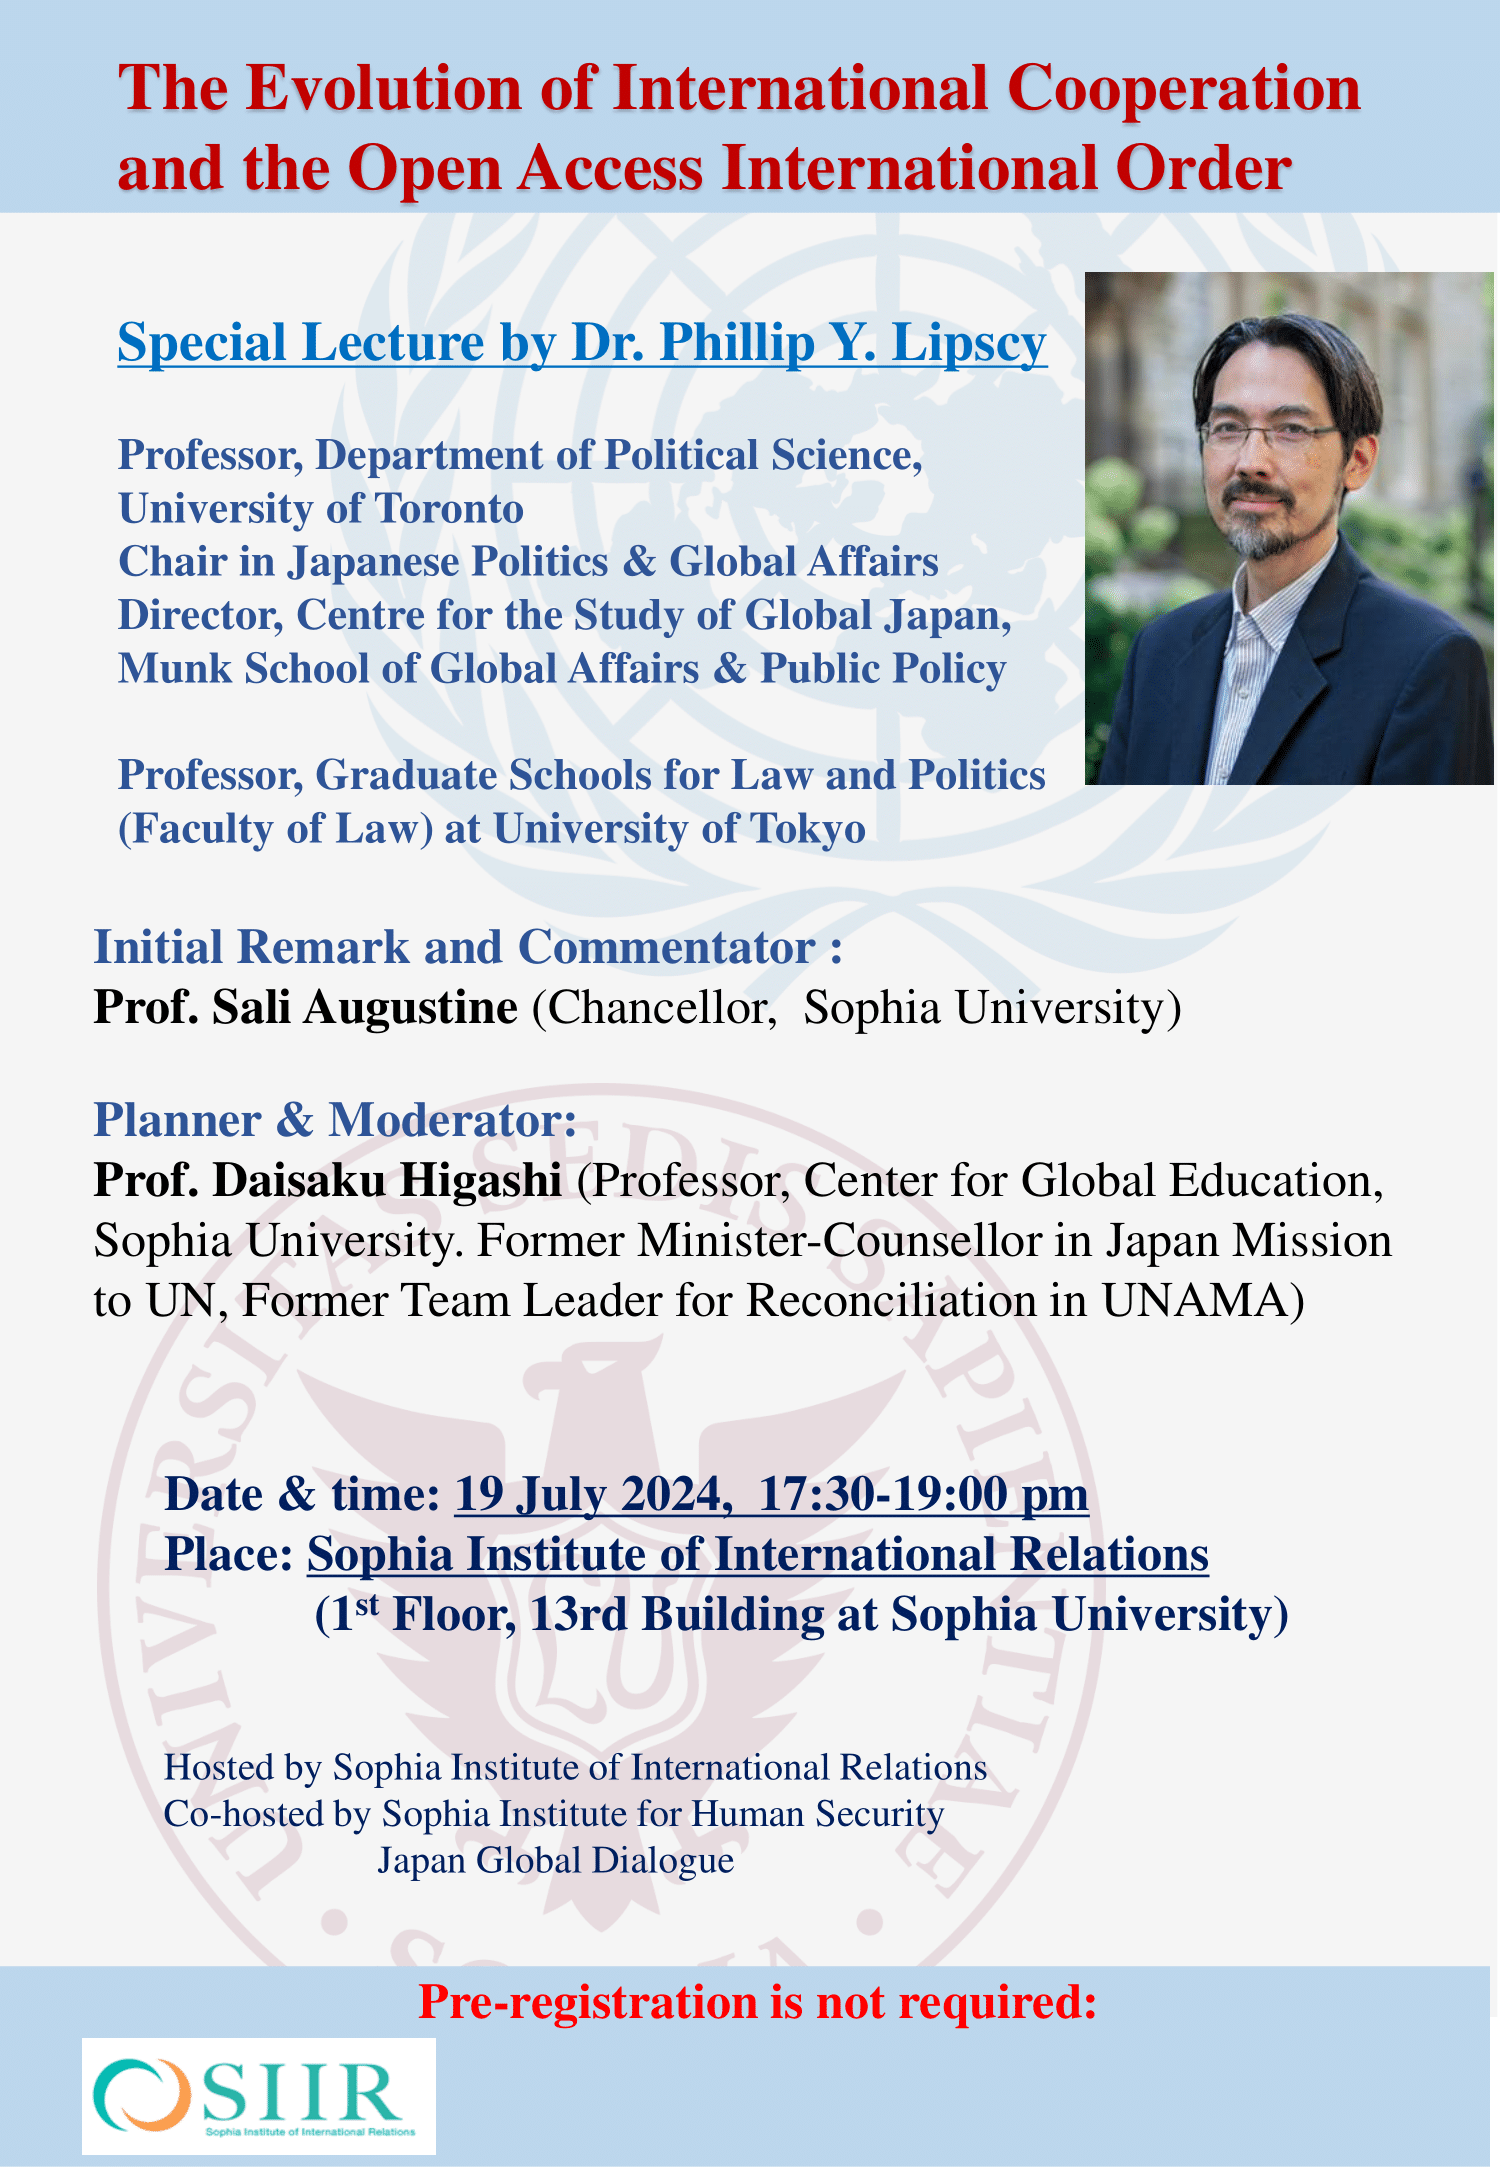 Special Lecture by Dr. Phillip Y. Lipscy, University of Toronto, on “The Evolution of International Cooperation and the Open Access International Order,” 19 July 2024, from 5:30pm to 7pm